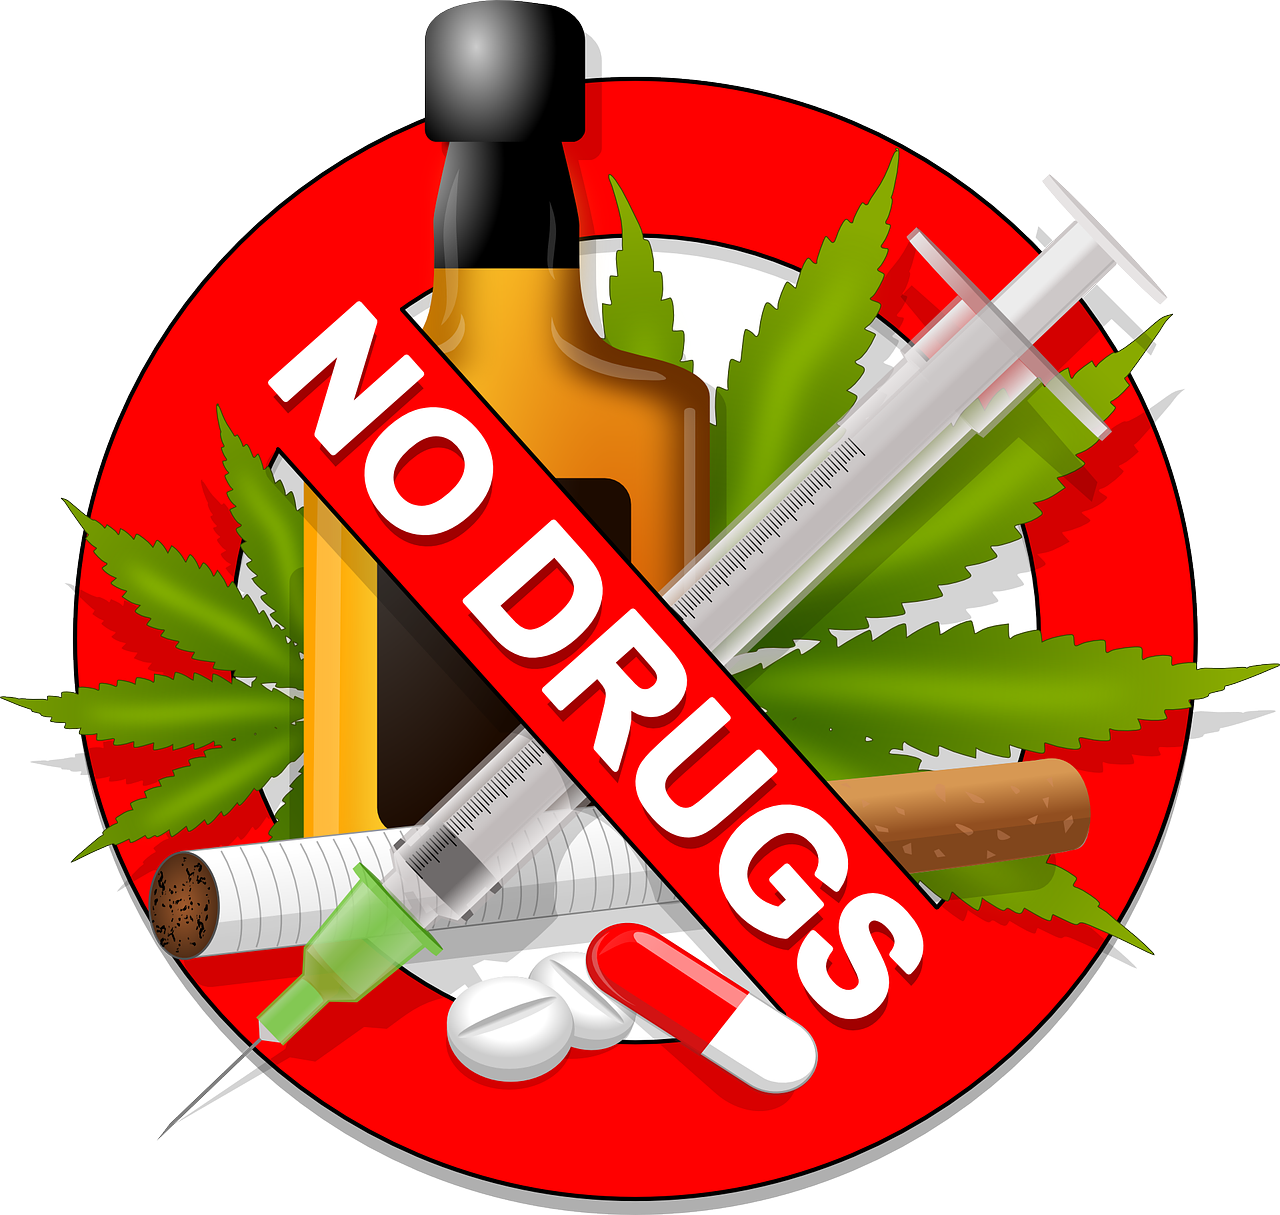 no-drugs-156771_1280.png